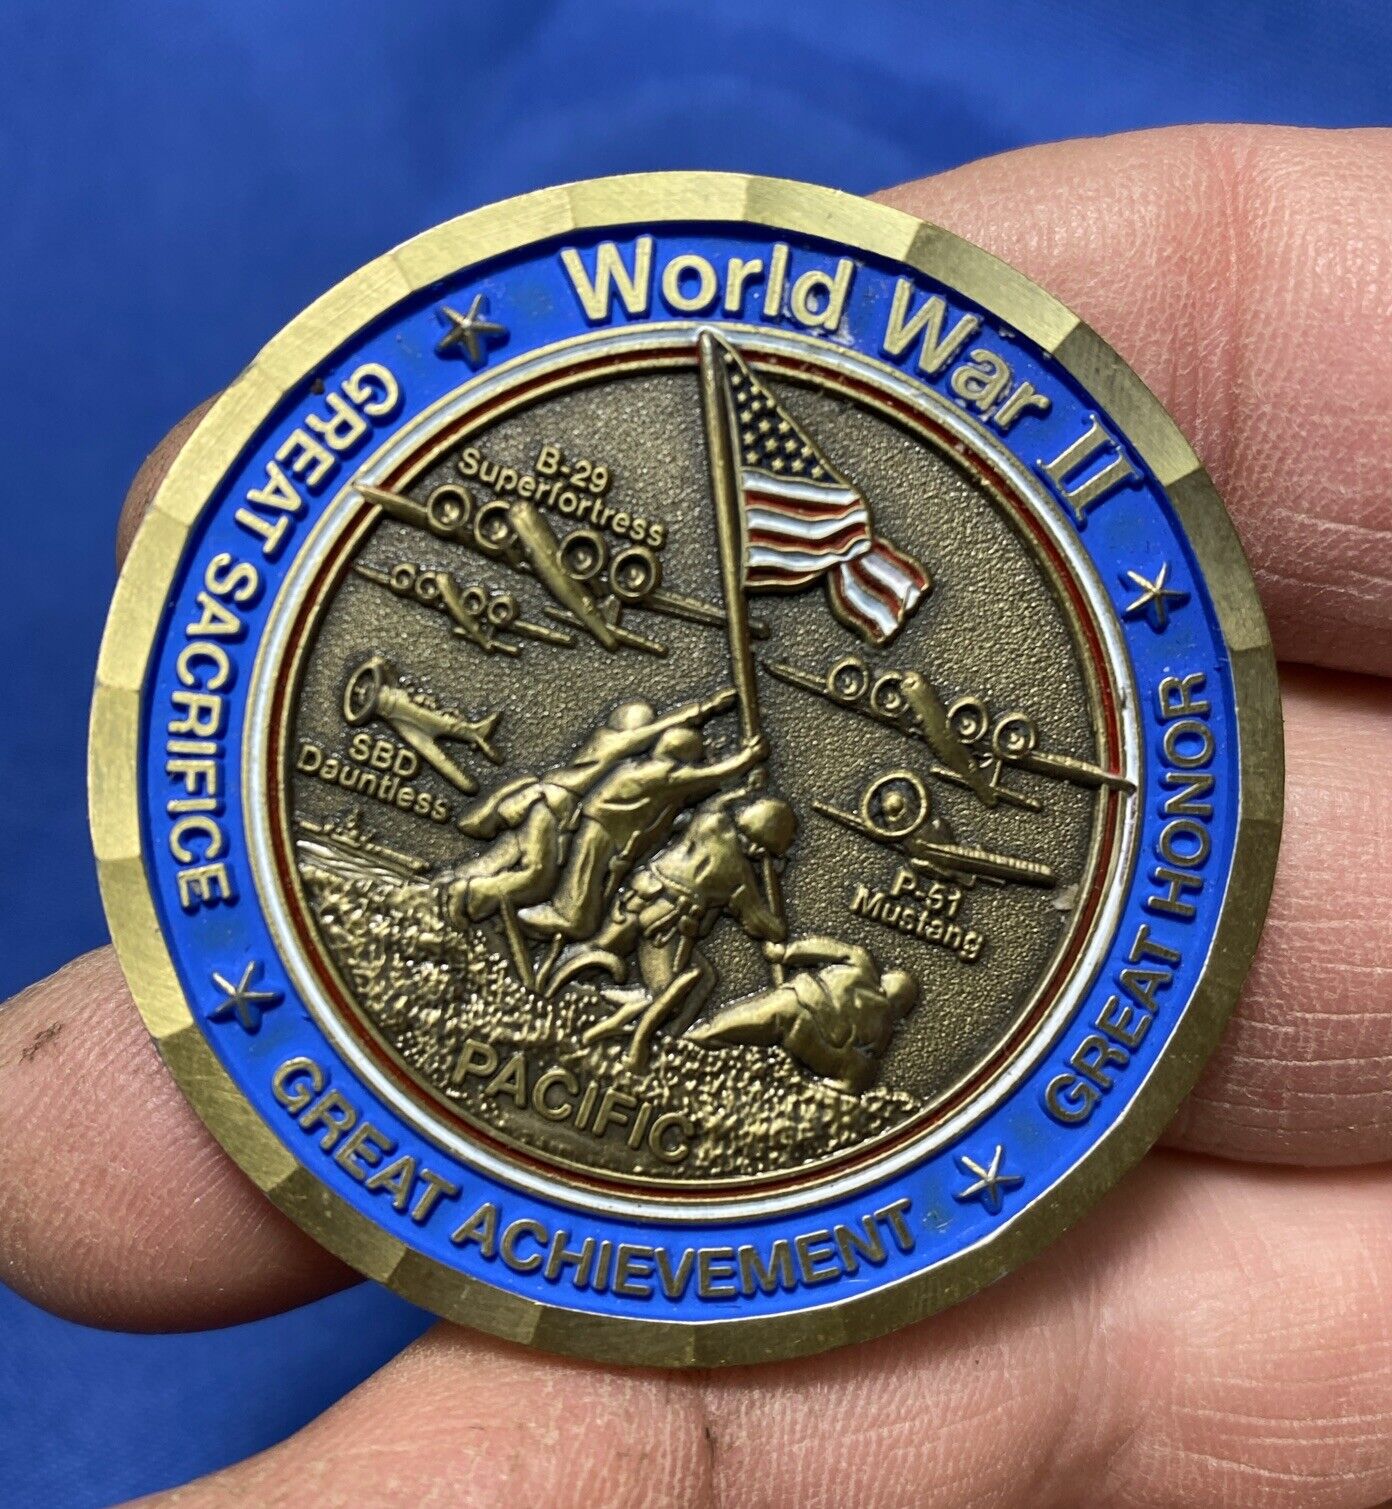 THE BOEING COMPANY WORLD WAR II THE GREATEST GENERATION CHALLENGE COIN 1934-1945